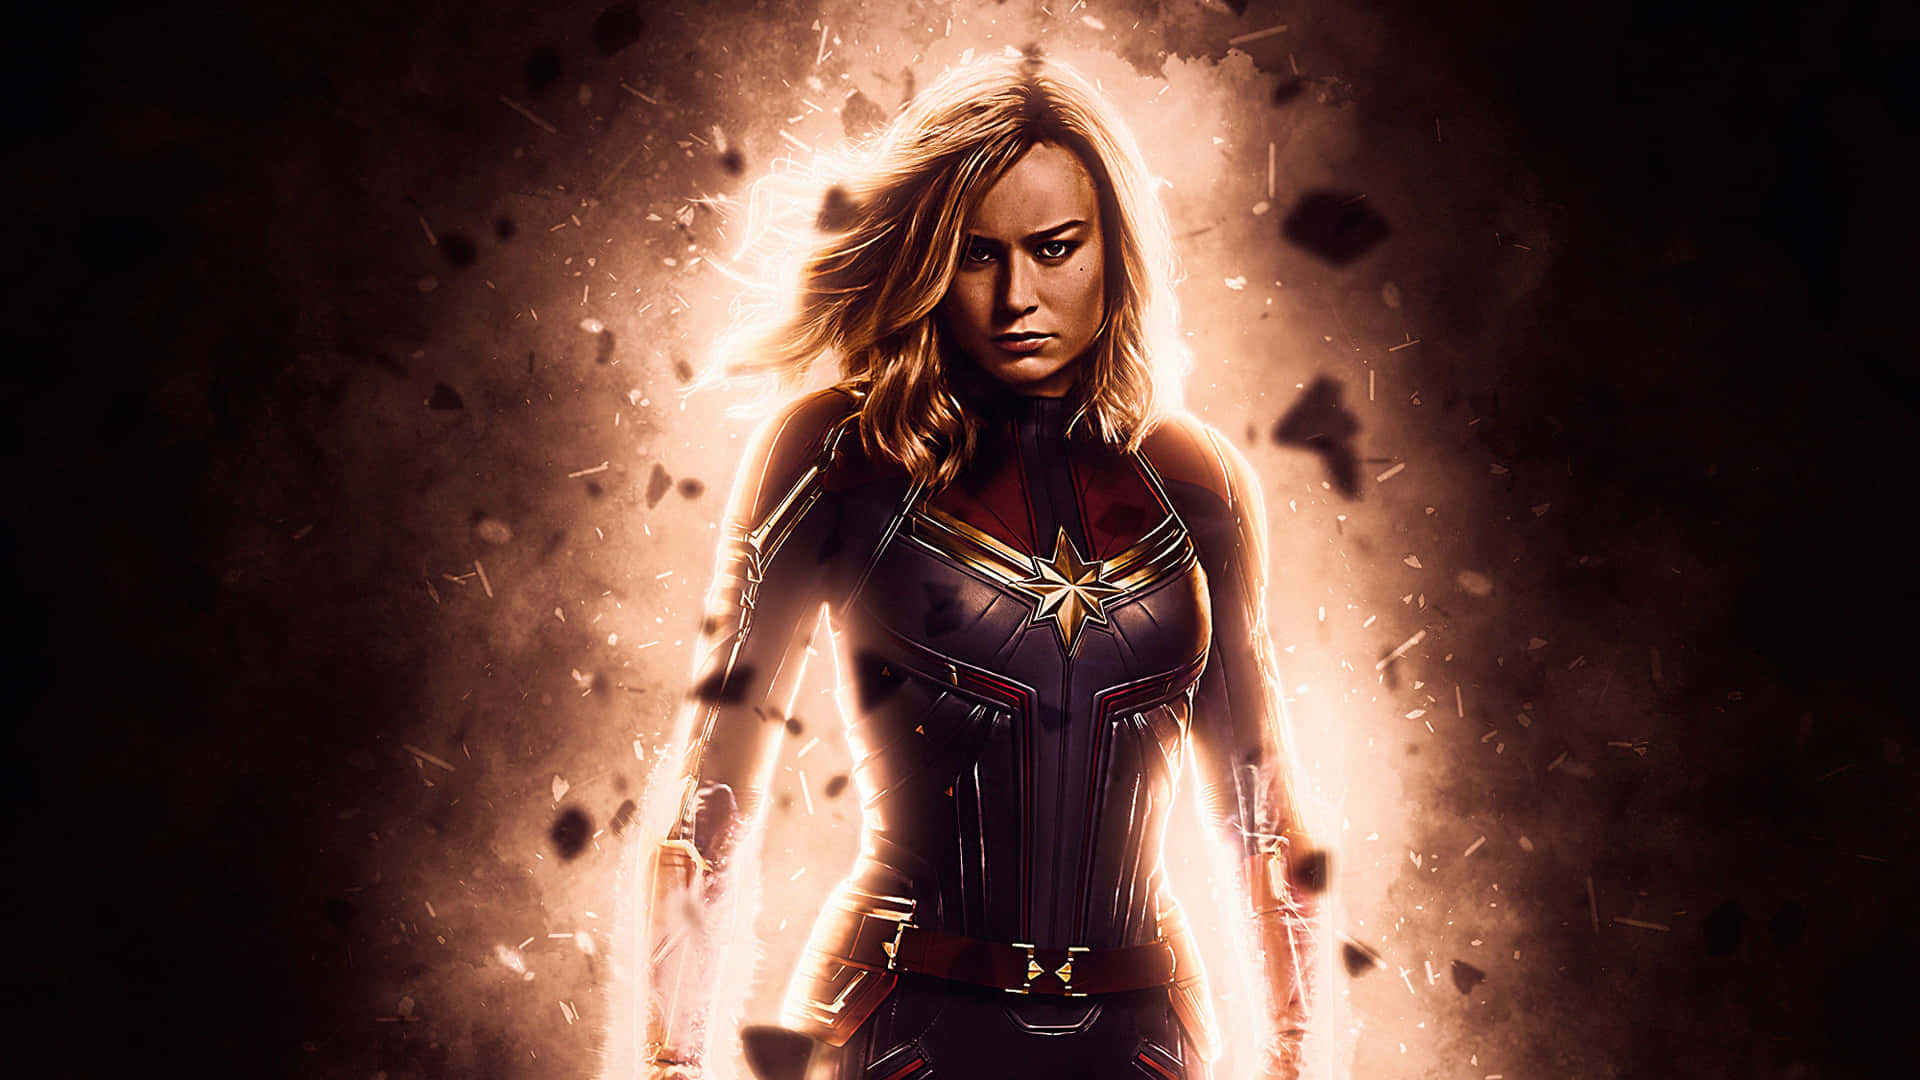 Rise As One Of Marvel's Strongest Heroes With Captain Marvel Hd!